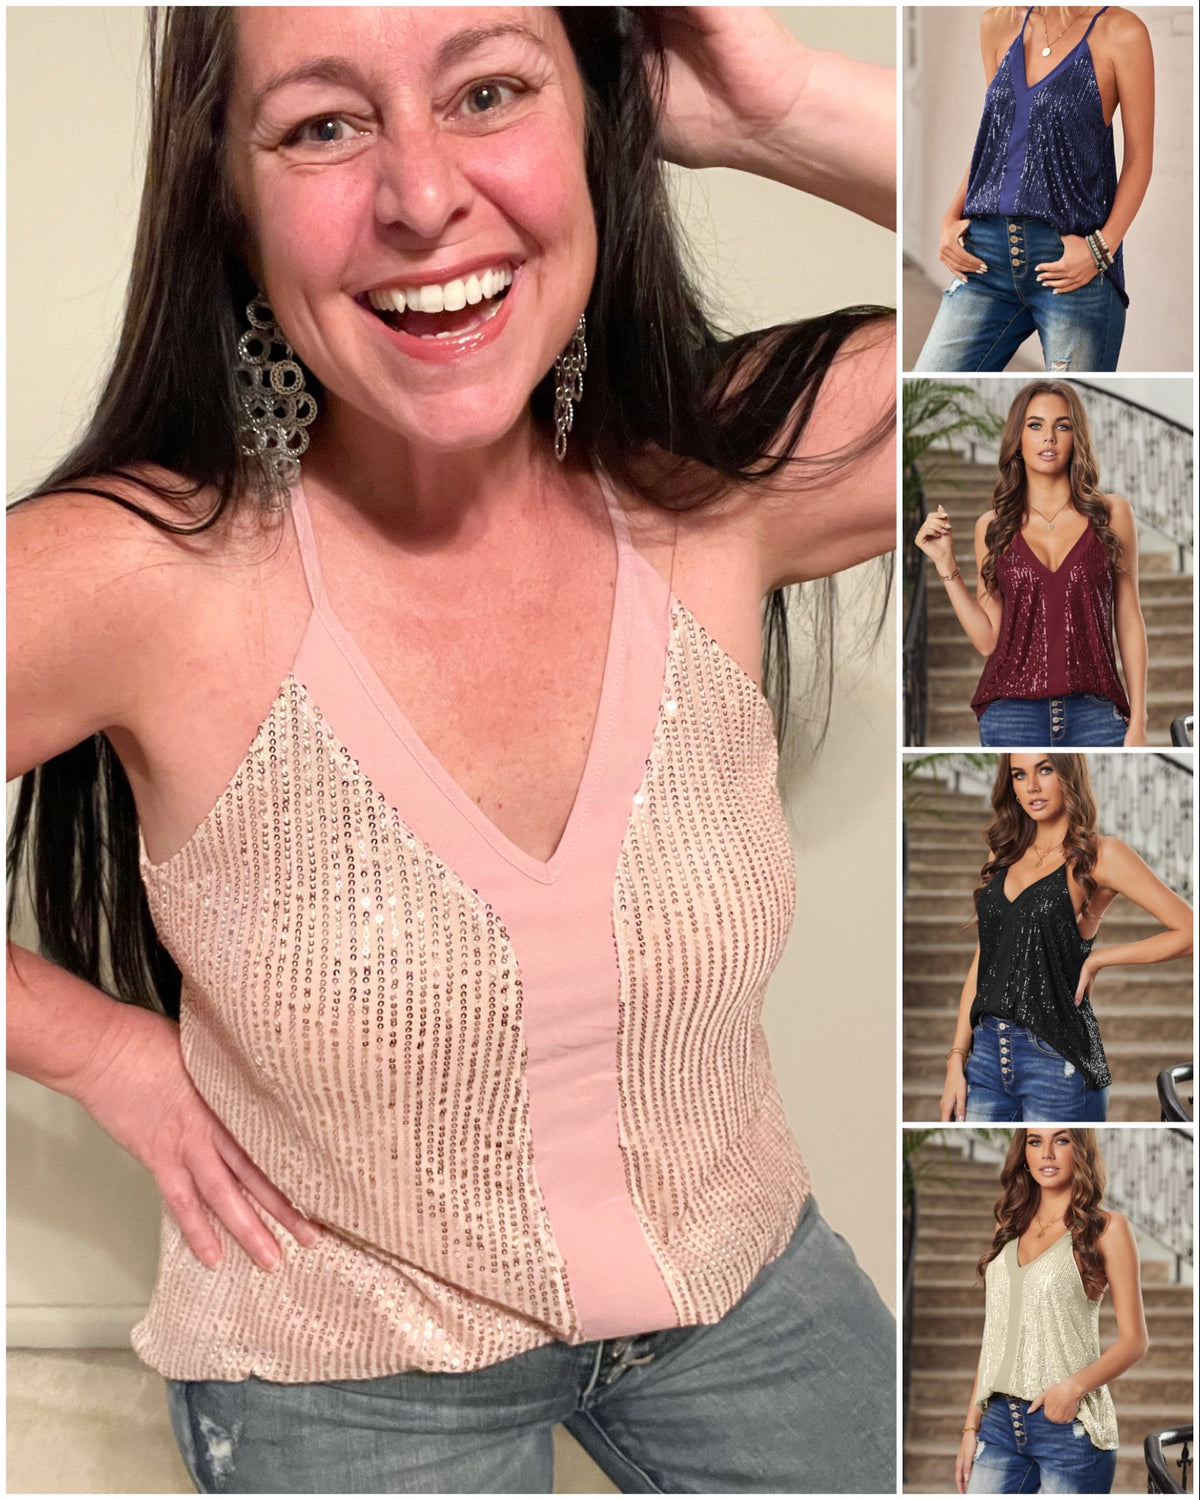 Sparkly Bling Cami Sequin Racerback Tank Adjustable Straps V-neckline Lined Material: 95% polyester, 5% spandex Stretchy True to Size 5 colors: Apricot Cream Off-white, Red Wine Burgundy, Black, Royal Navy Blue, Blush Pink